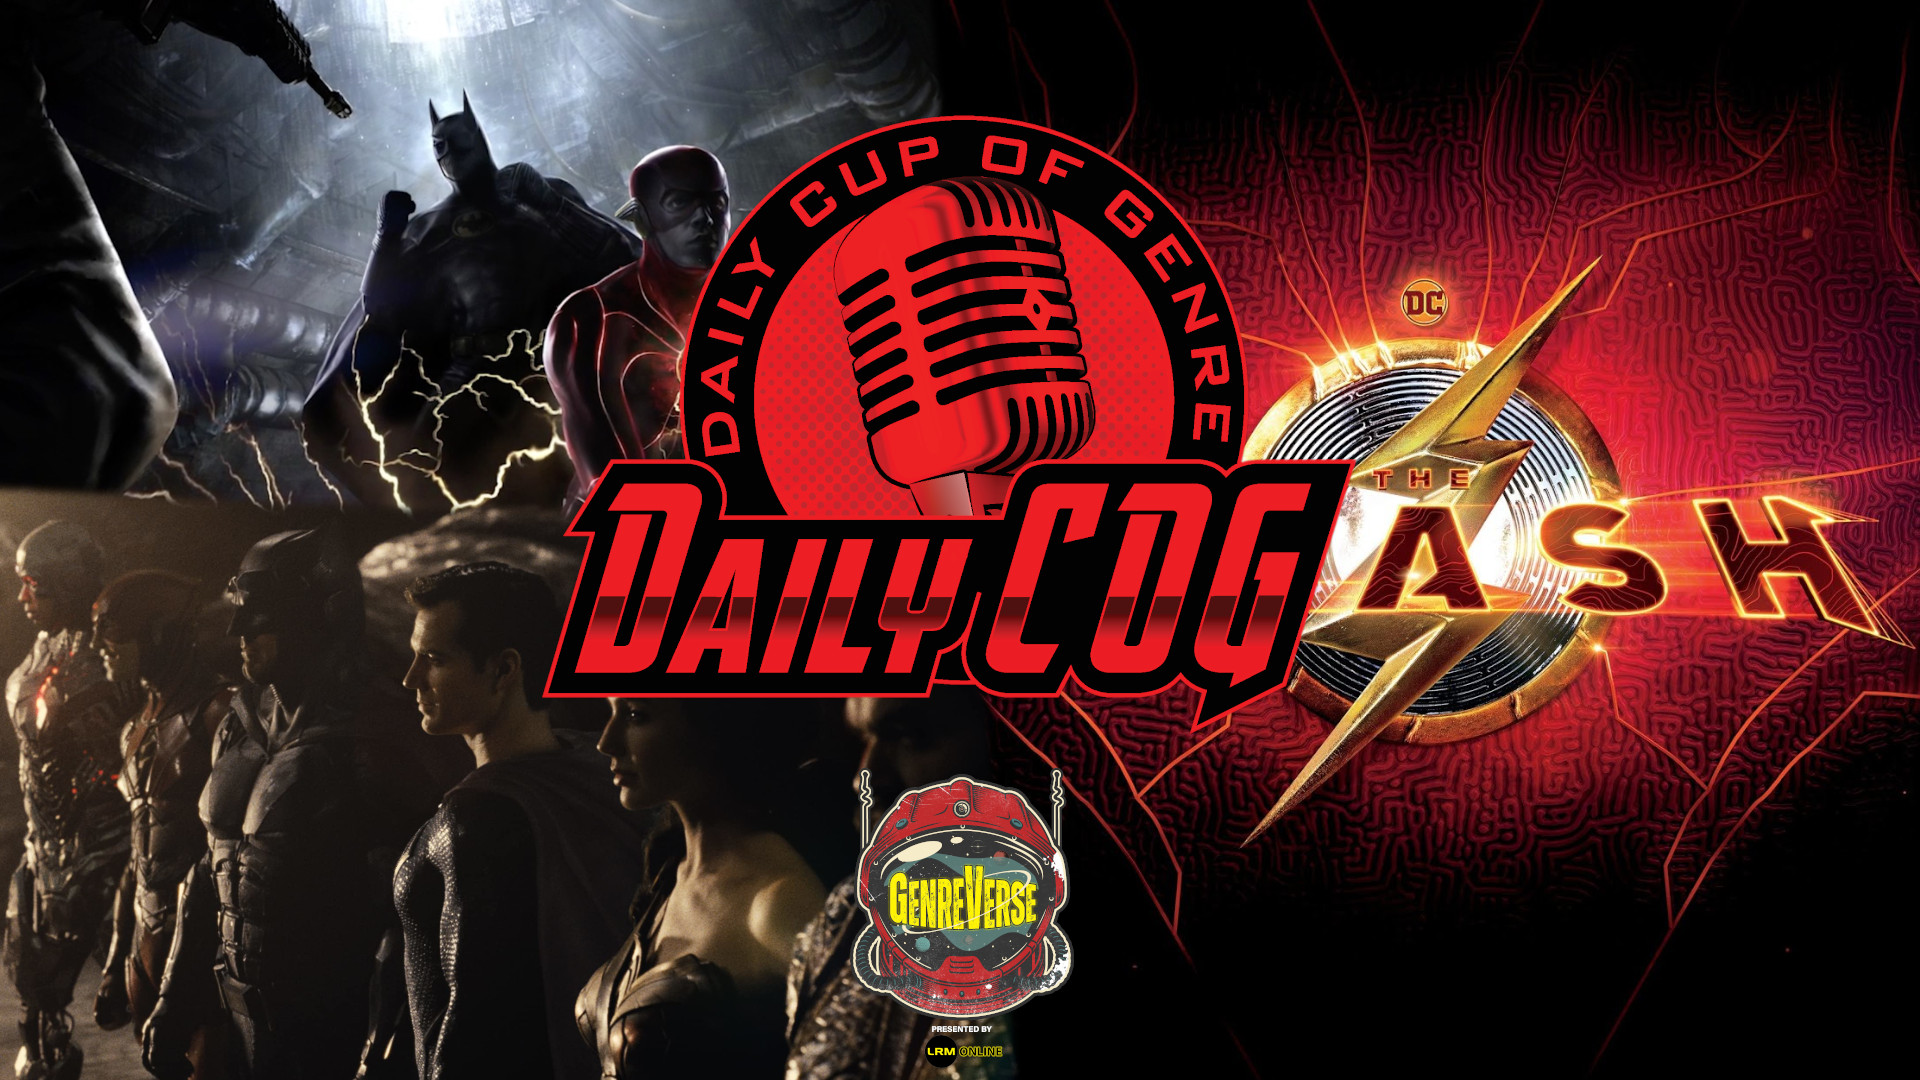 The Flash Rumors The Flash Vs The Snyderverse What Is And Isn't Likely Going On Daily COG